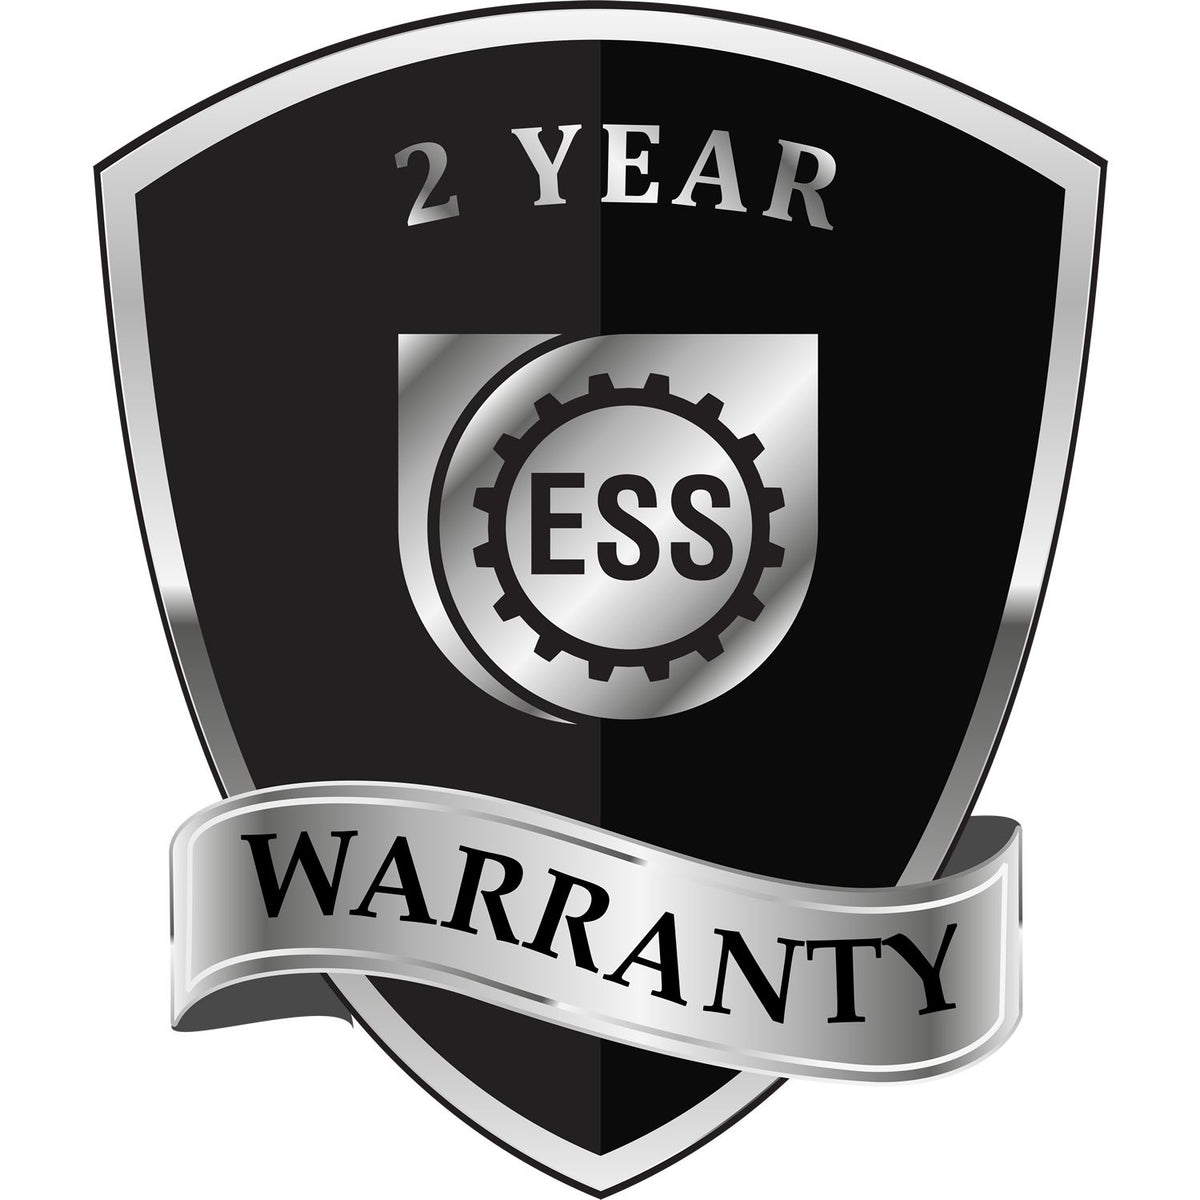 A black and silver badge or emblem showing warranty information for the Gift West Virginia Landscape Architect Seal